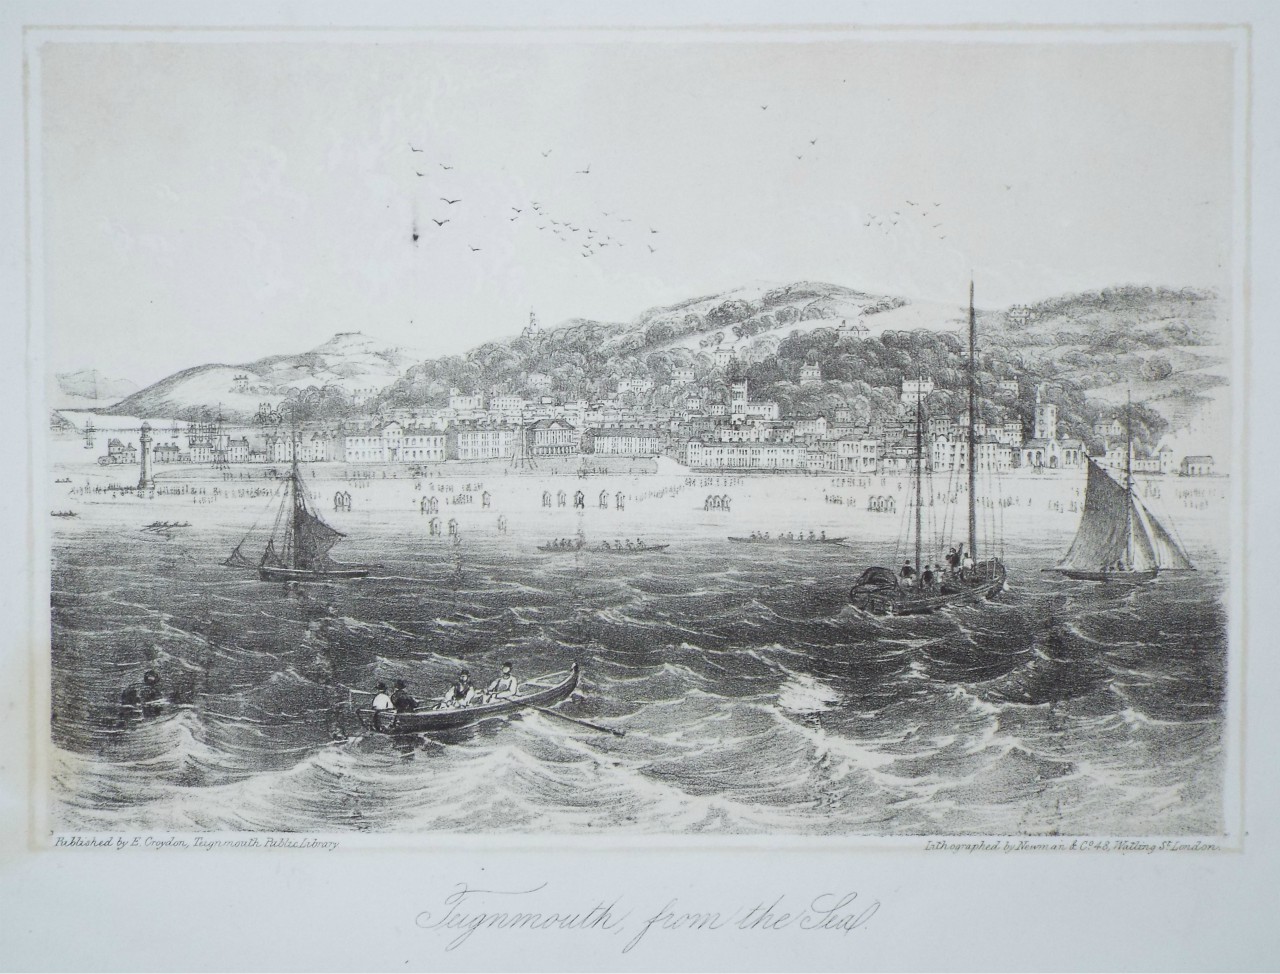 Lithograph - Teignmouth, from the Sea. - Newman